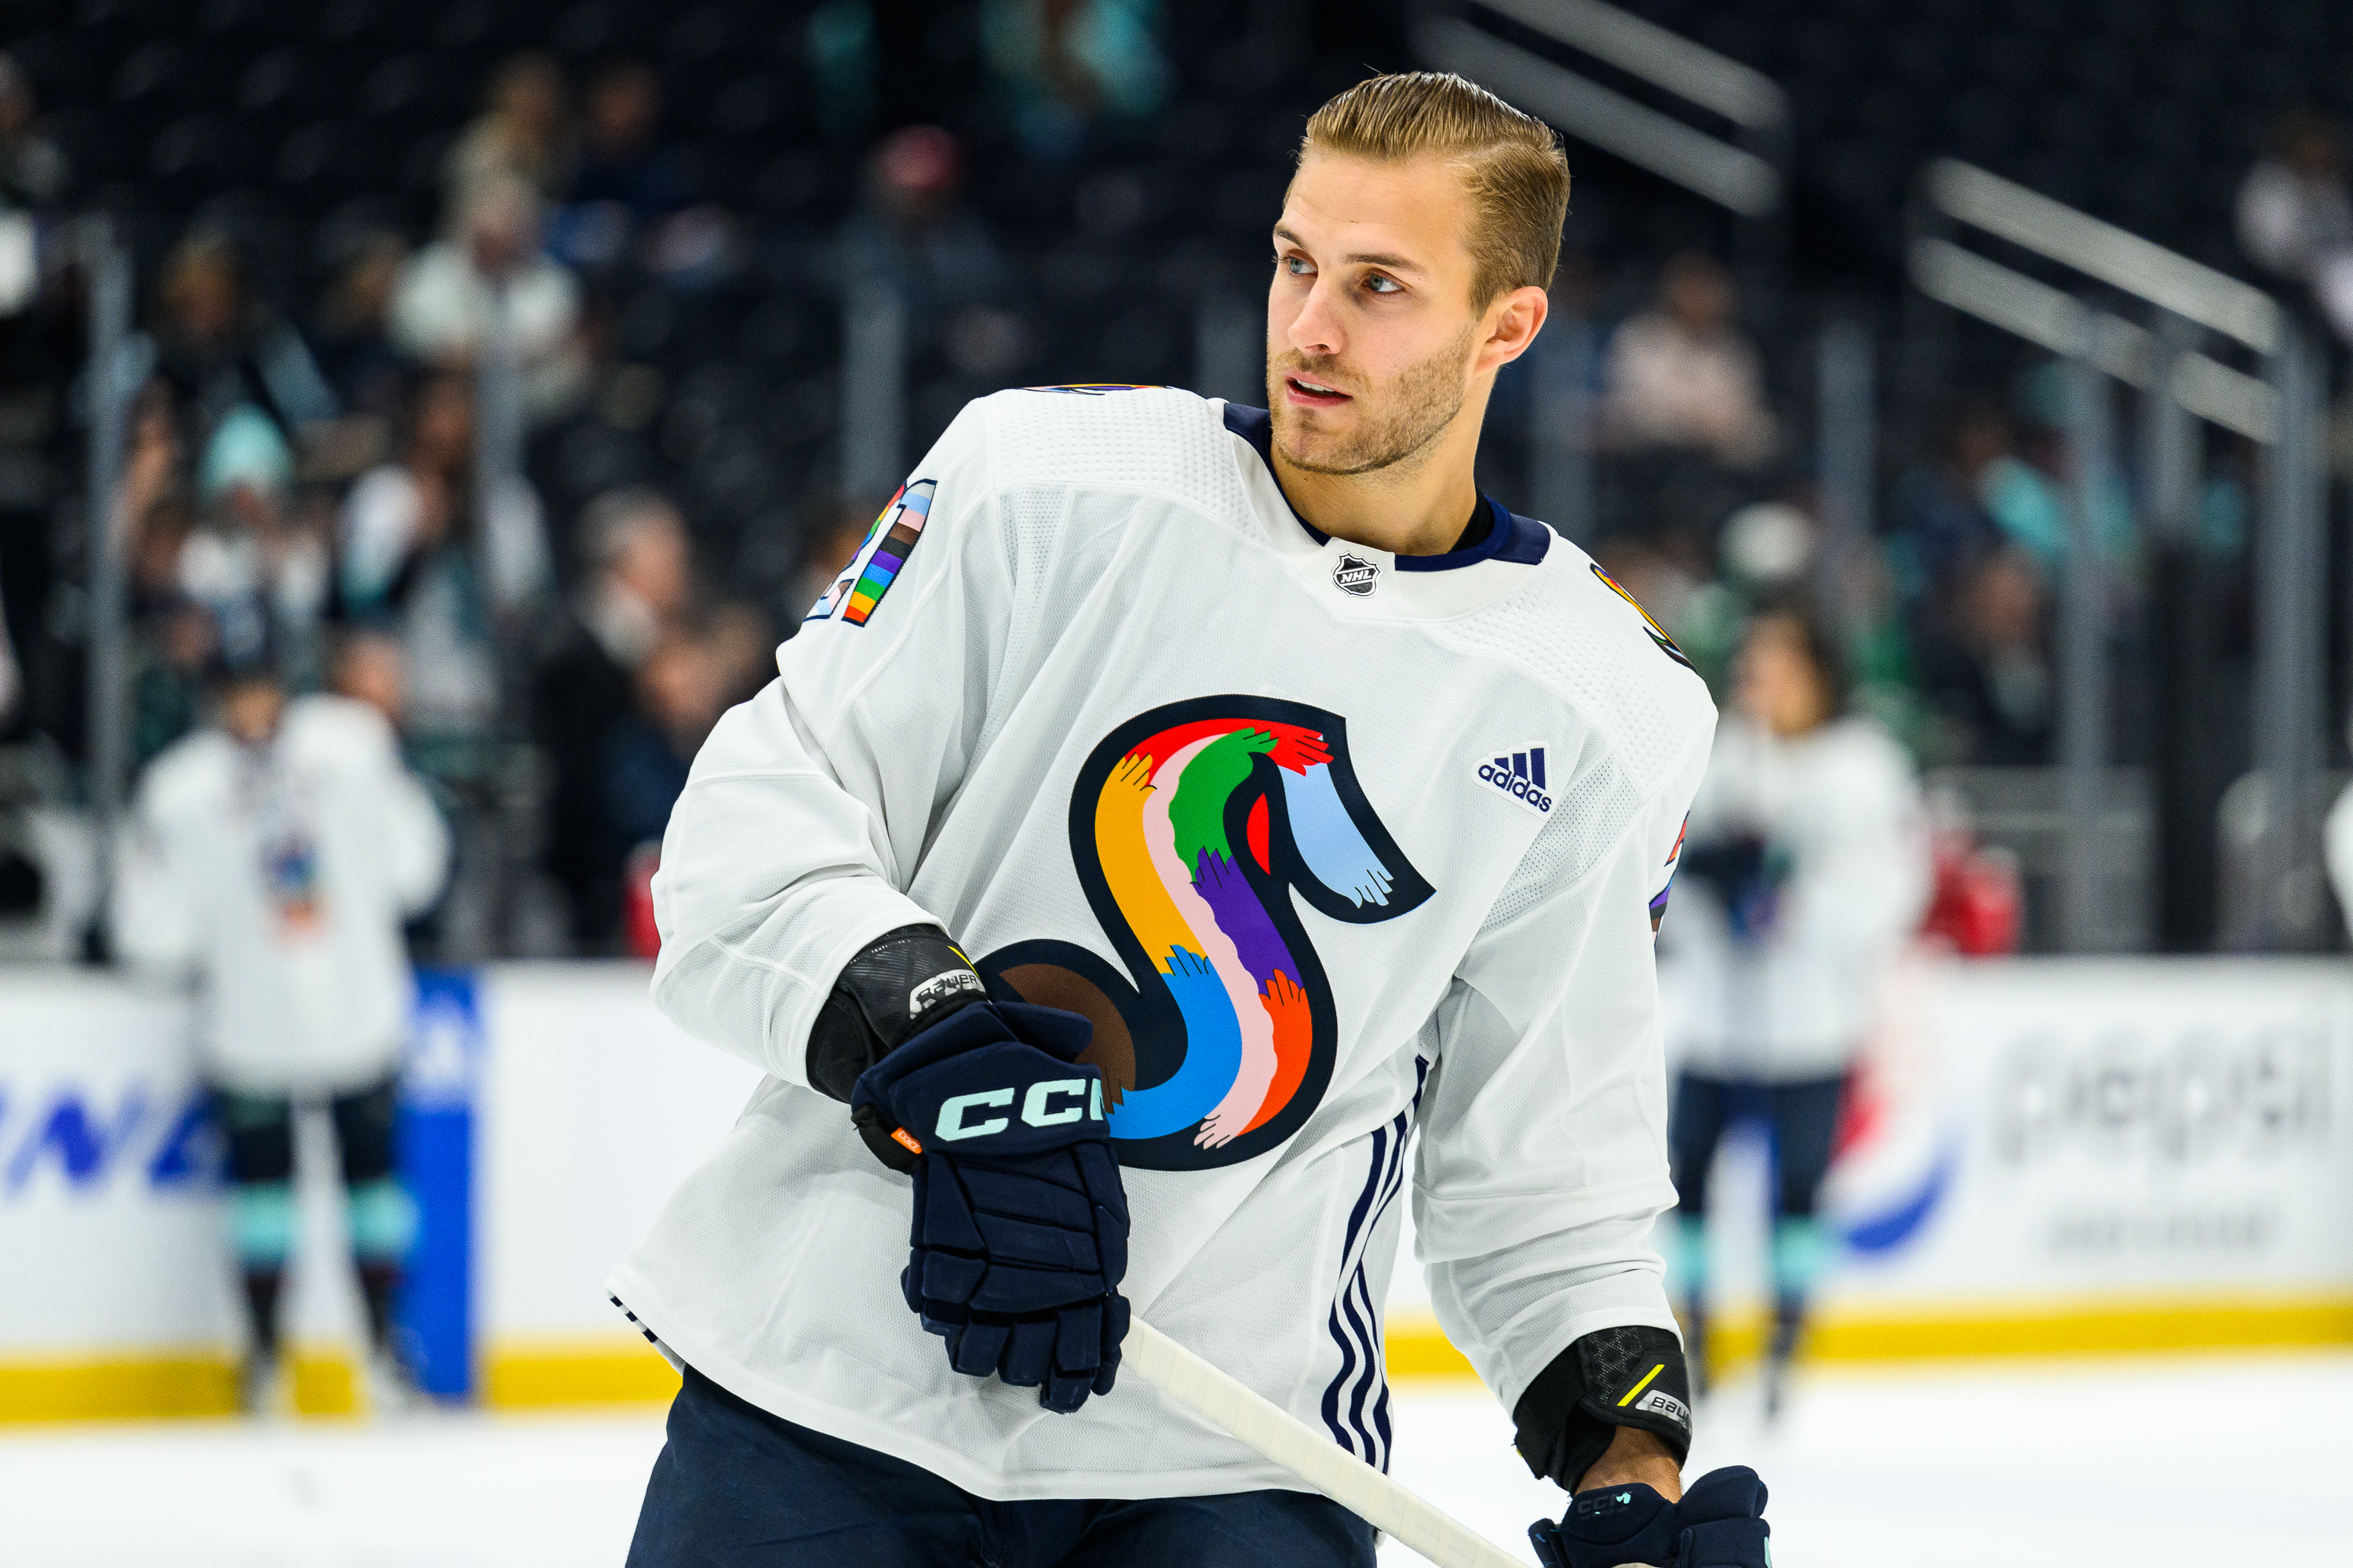 Alex Wennberg of the Seattle Kraken skates on the ice during warmups in his special Pride Night jersey